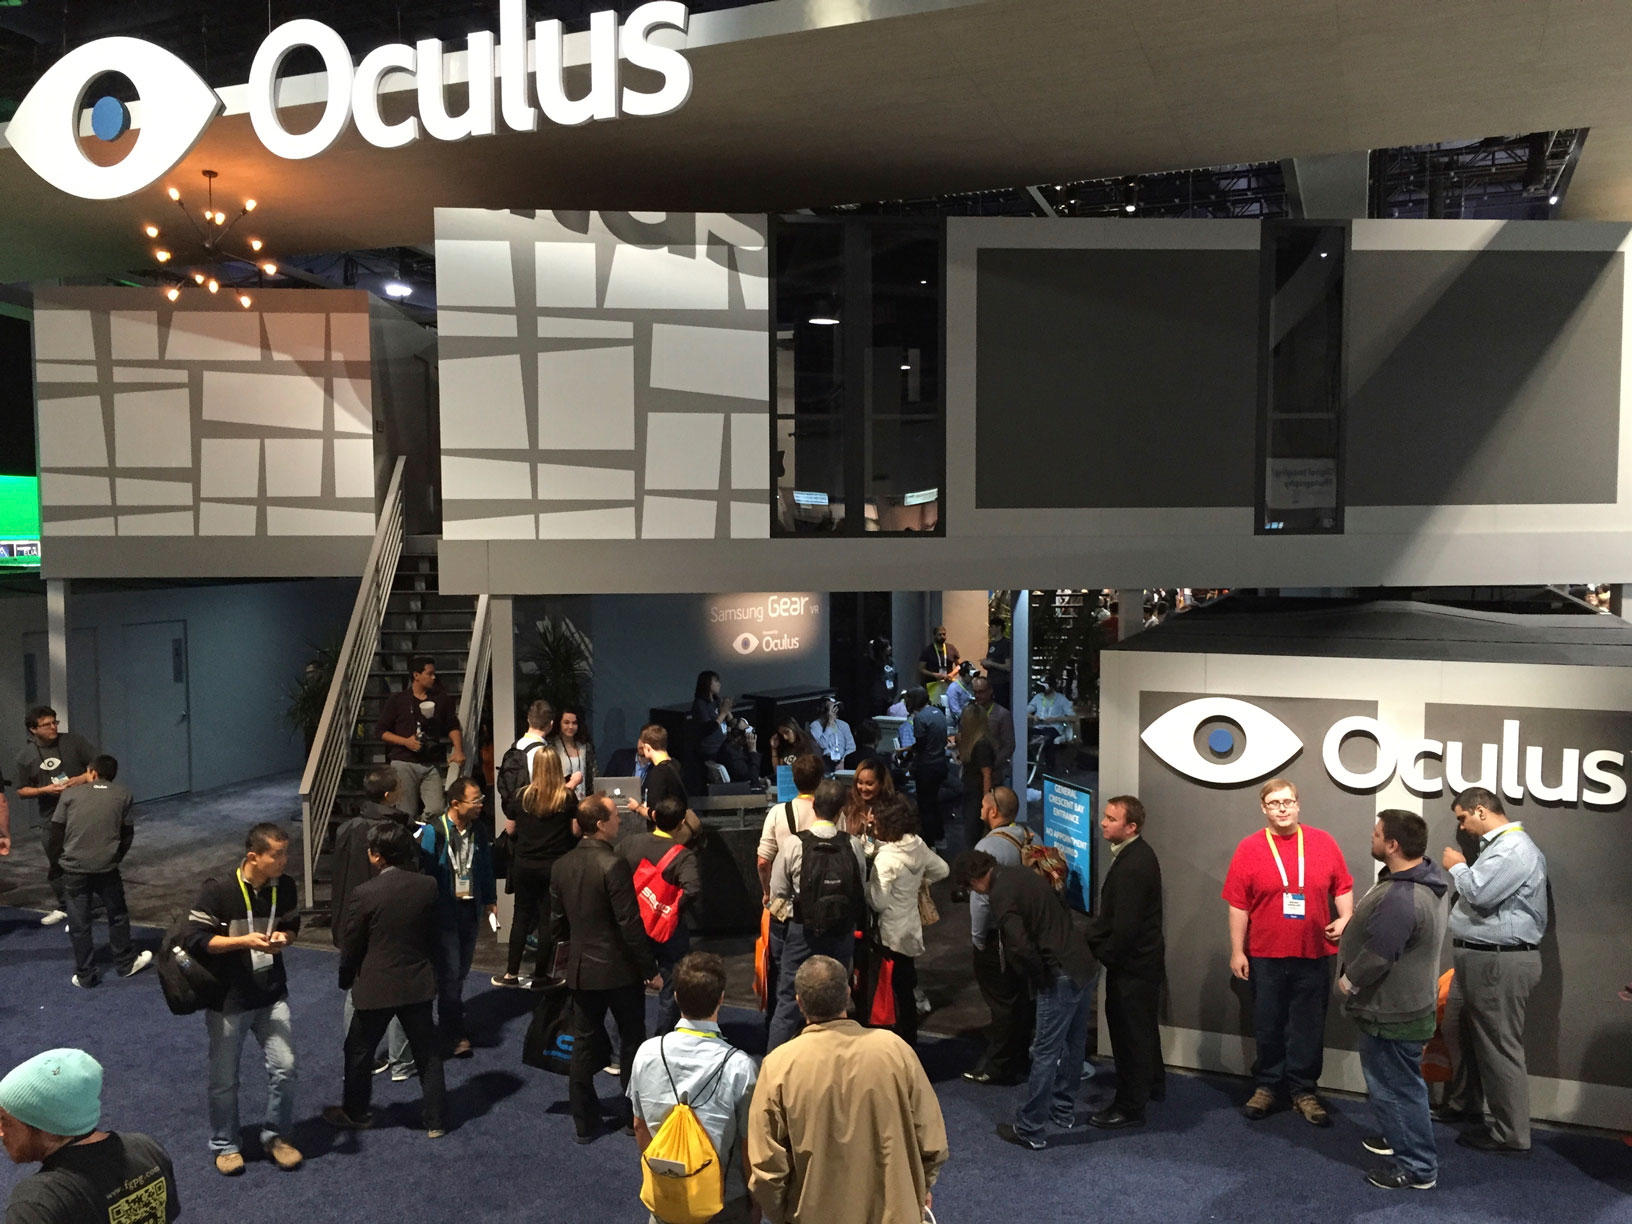 CES 2015 - Oculus booth